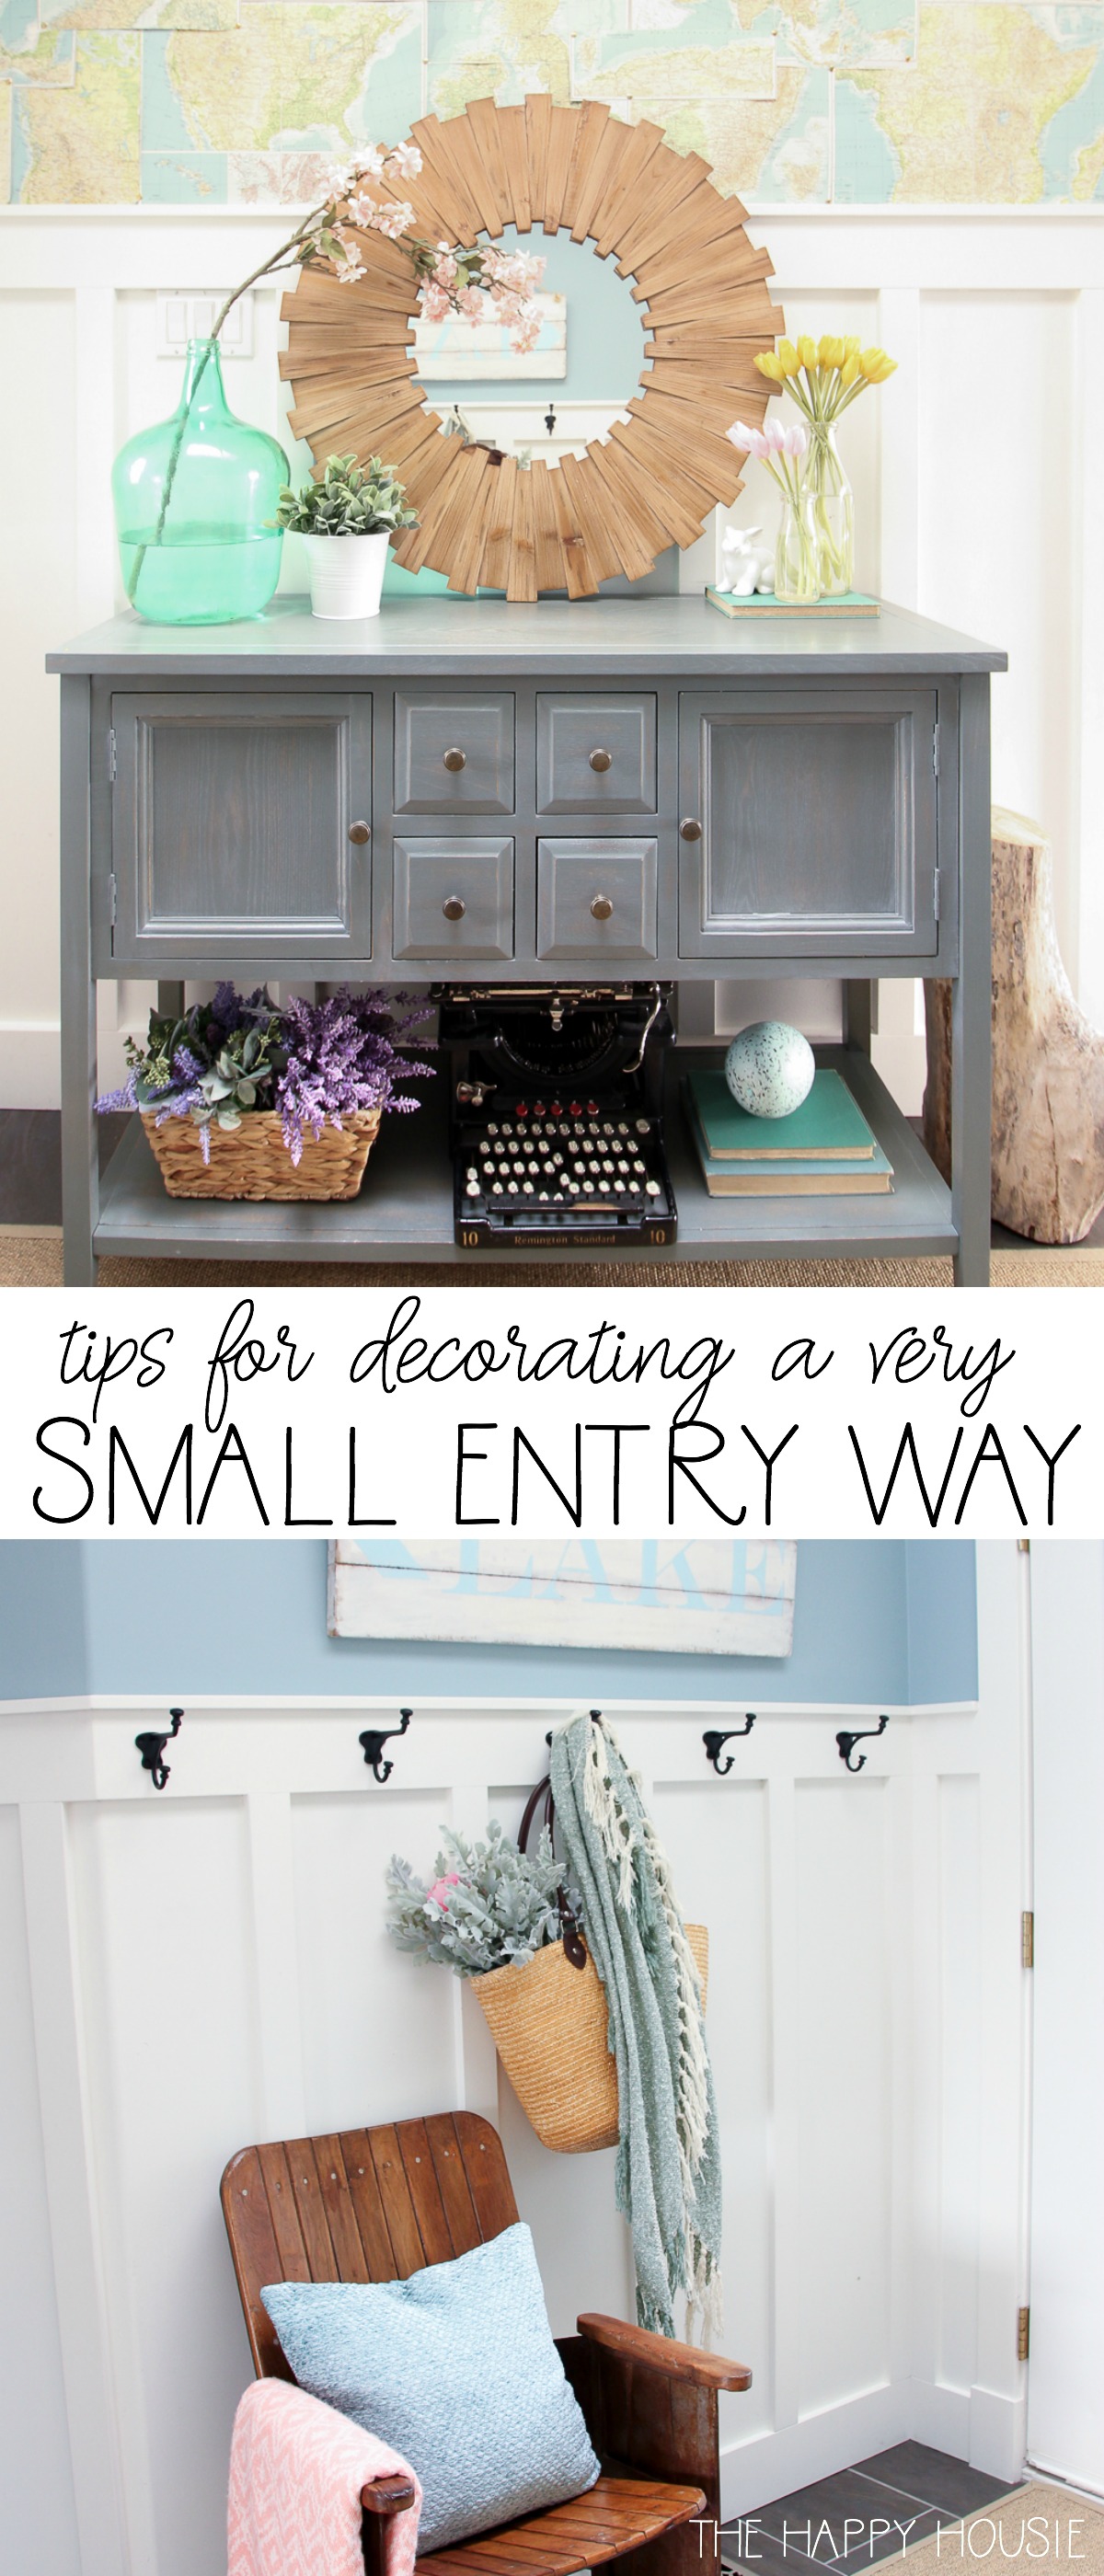 Tips for decorating a very small entry way graphic.